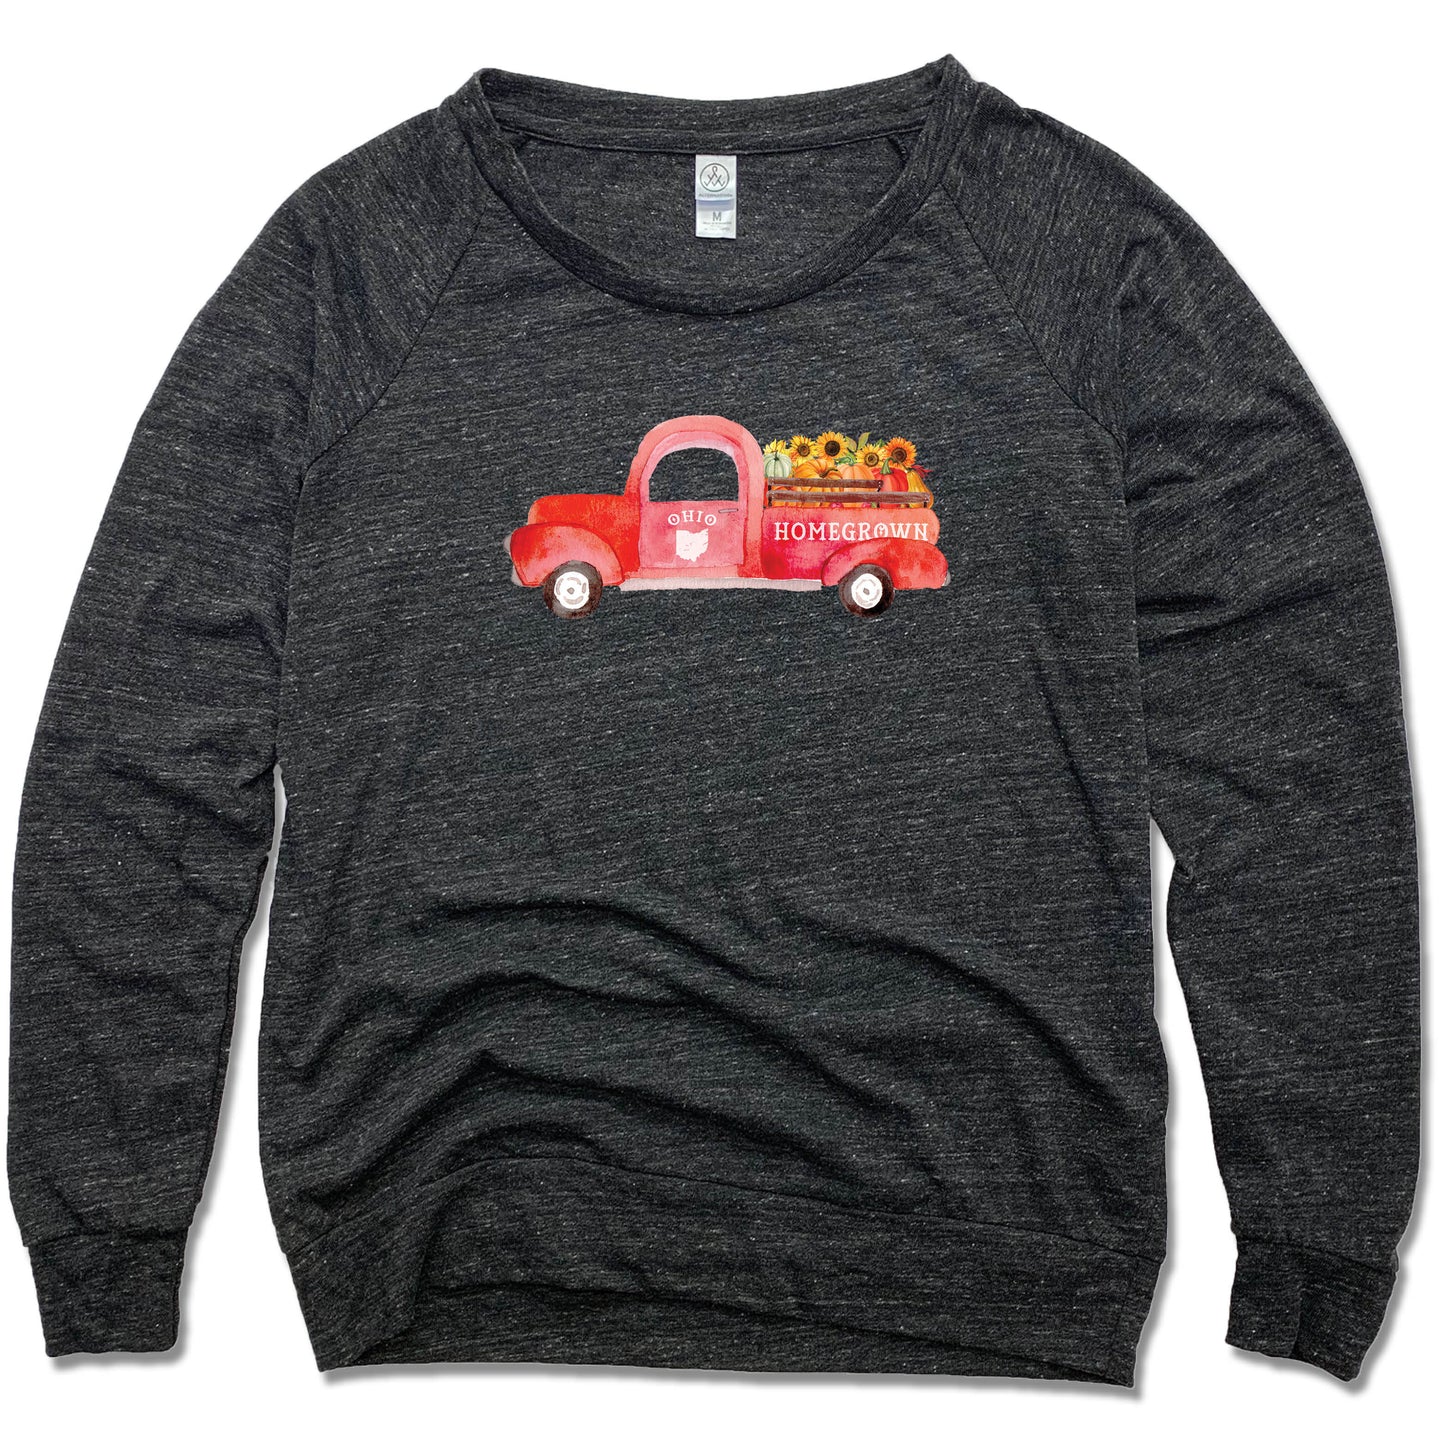 Ohio Fall Homegrown Truck - Slouchy Top